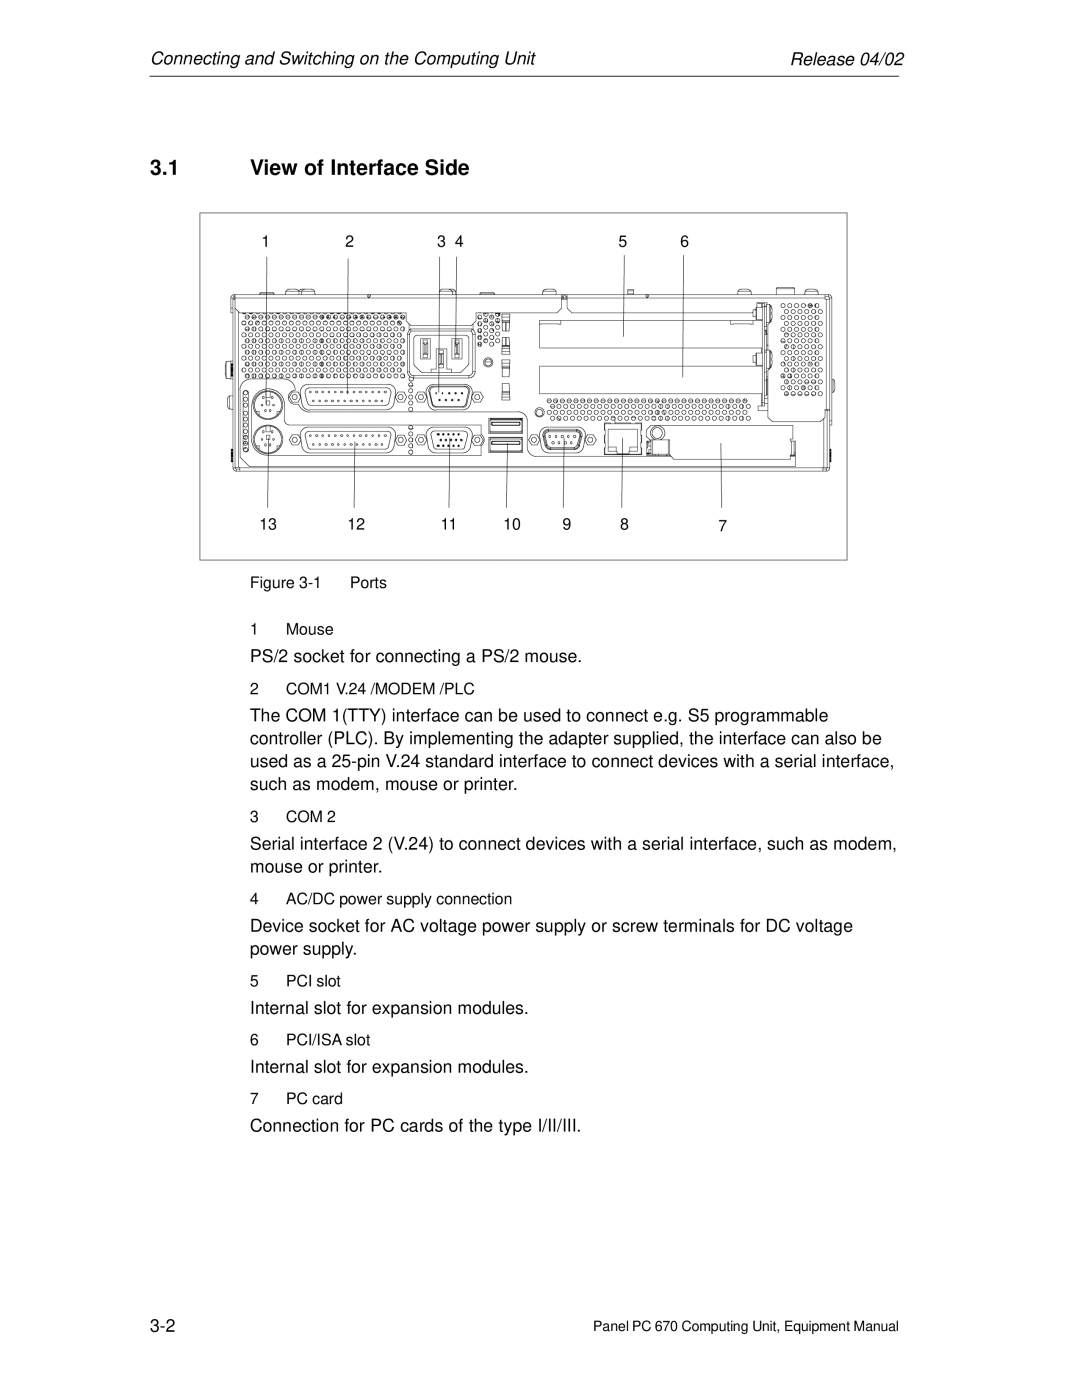 Siemens PC 670 manual View of Interface Side, Ports 